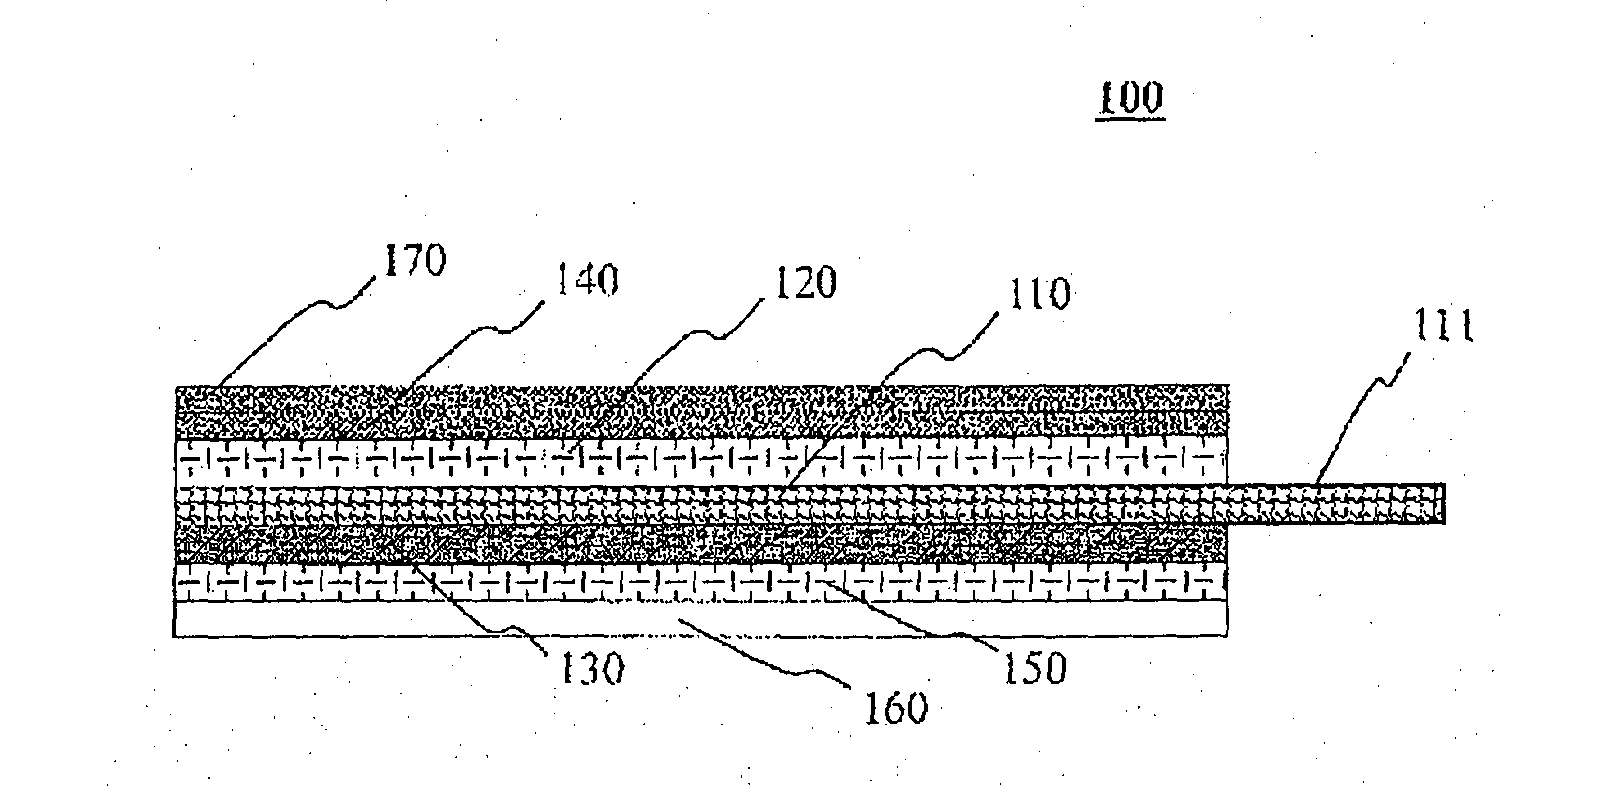 Machine-Readable Passport With A Polycarbonate (PC) Datapage And Method For Making The same